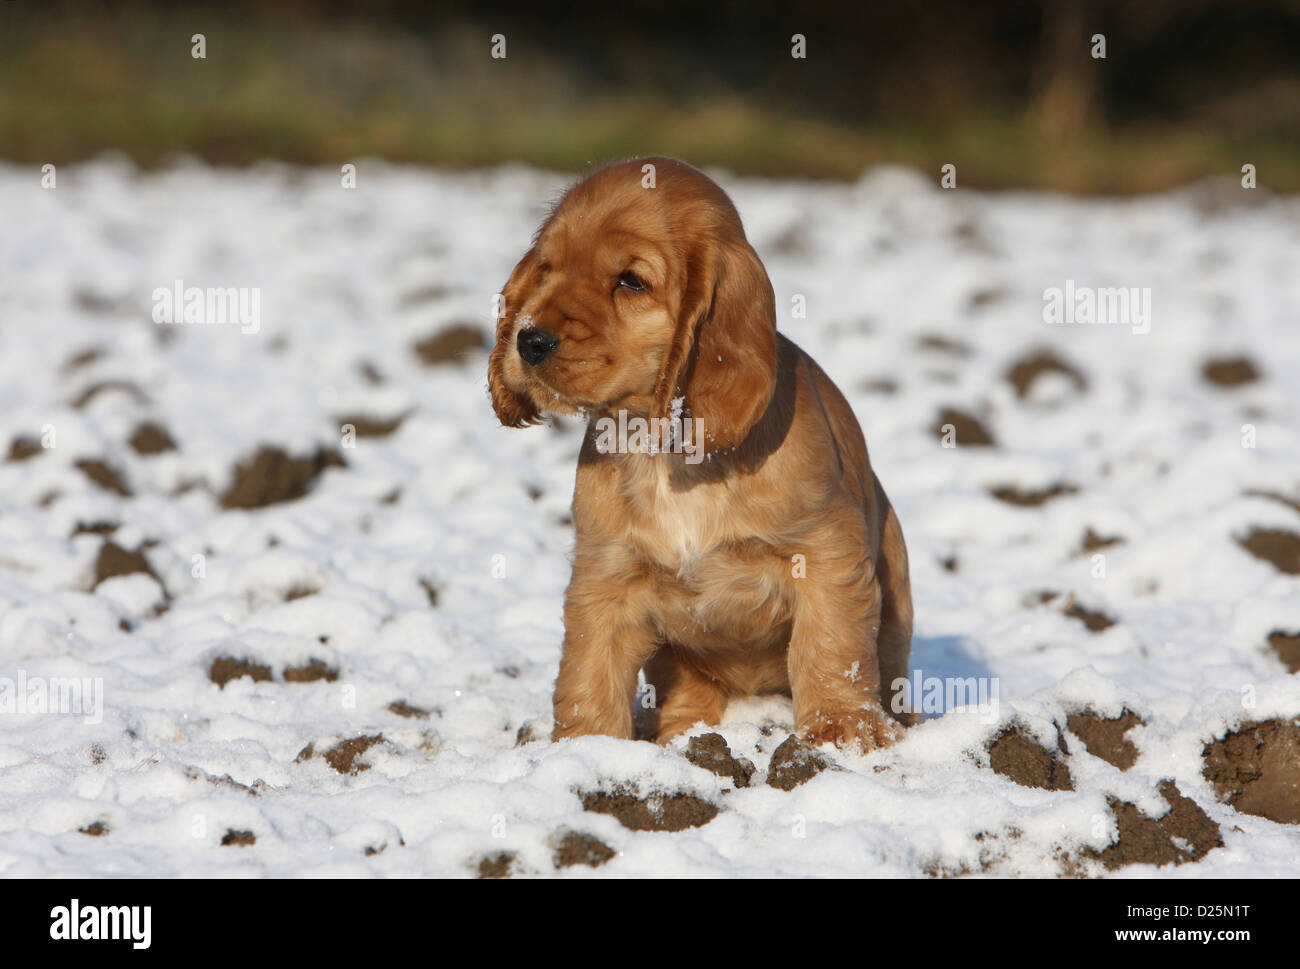 Dog English Cocker Spaniel puppy (red) sitting in snow Stock Photo